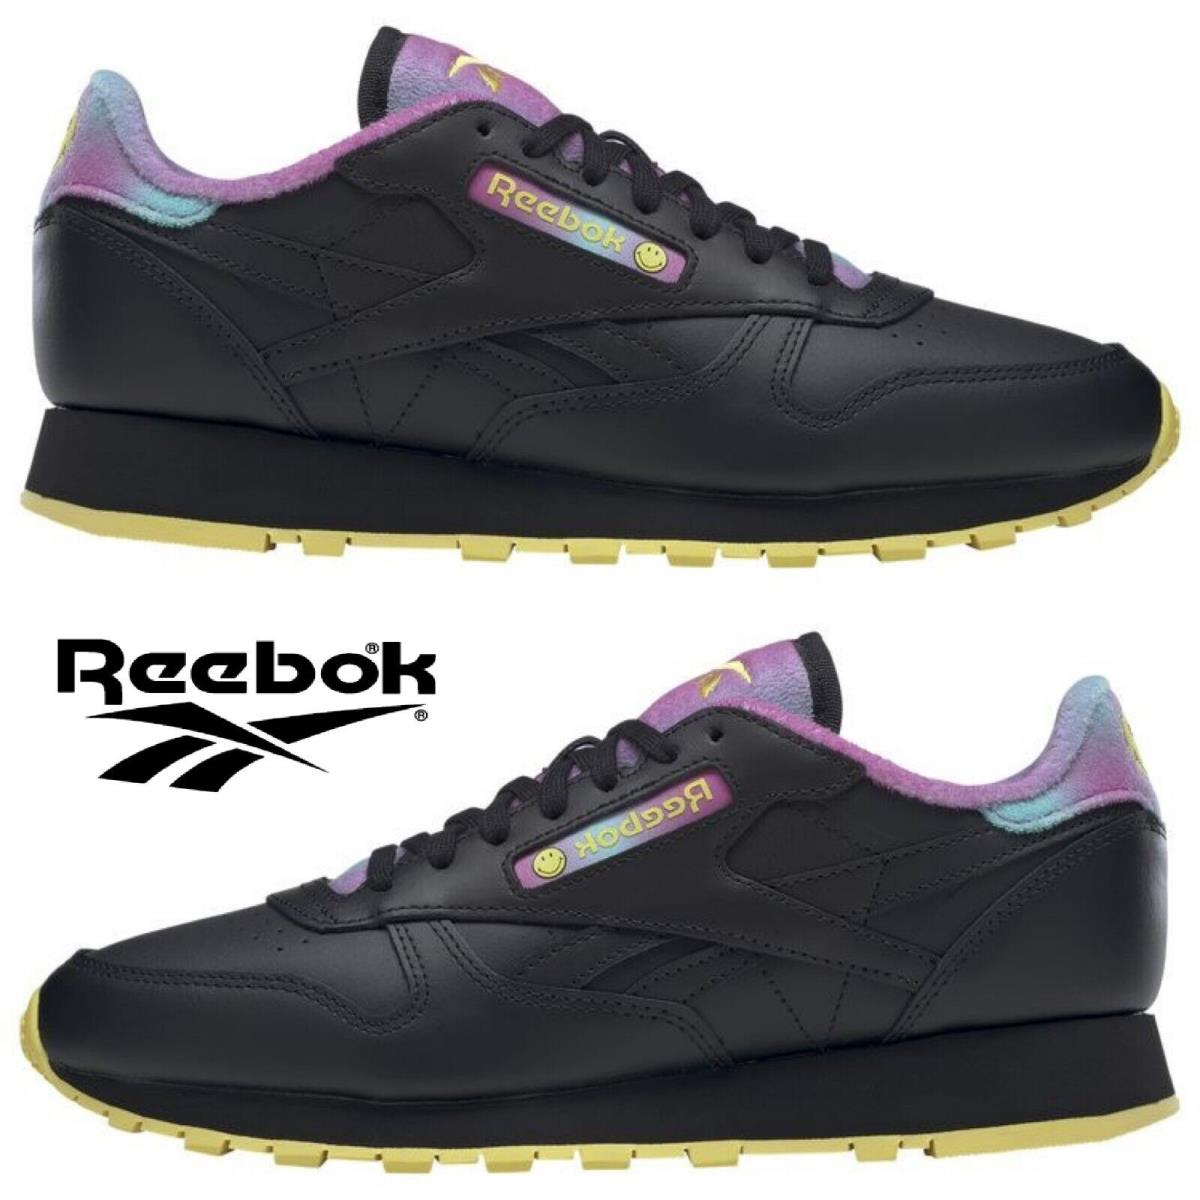 Reebok Classic Leather Men`s Sneakers Running Training Shoes Casual Sport - Black, Manufacturer: Black/Multi